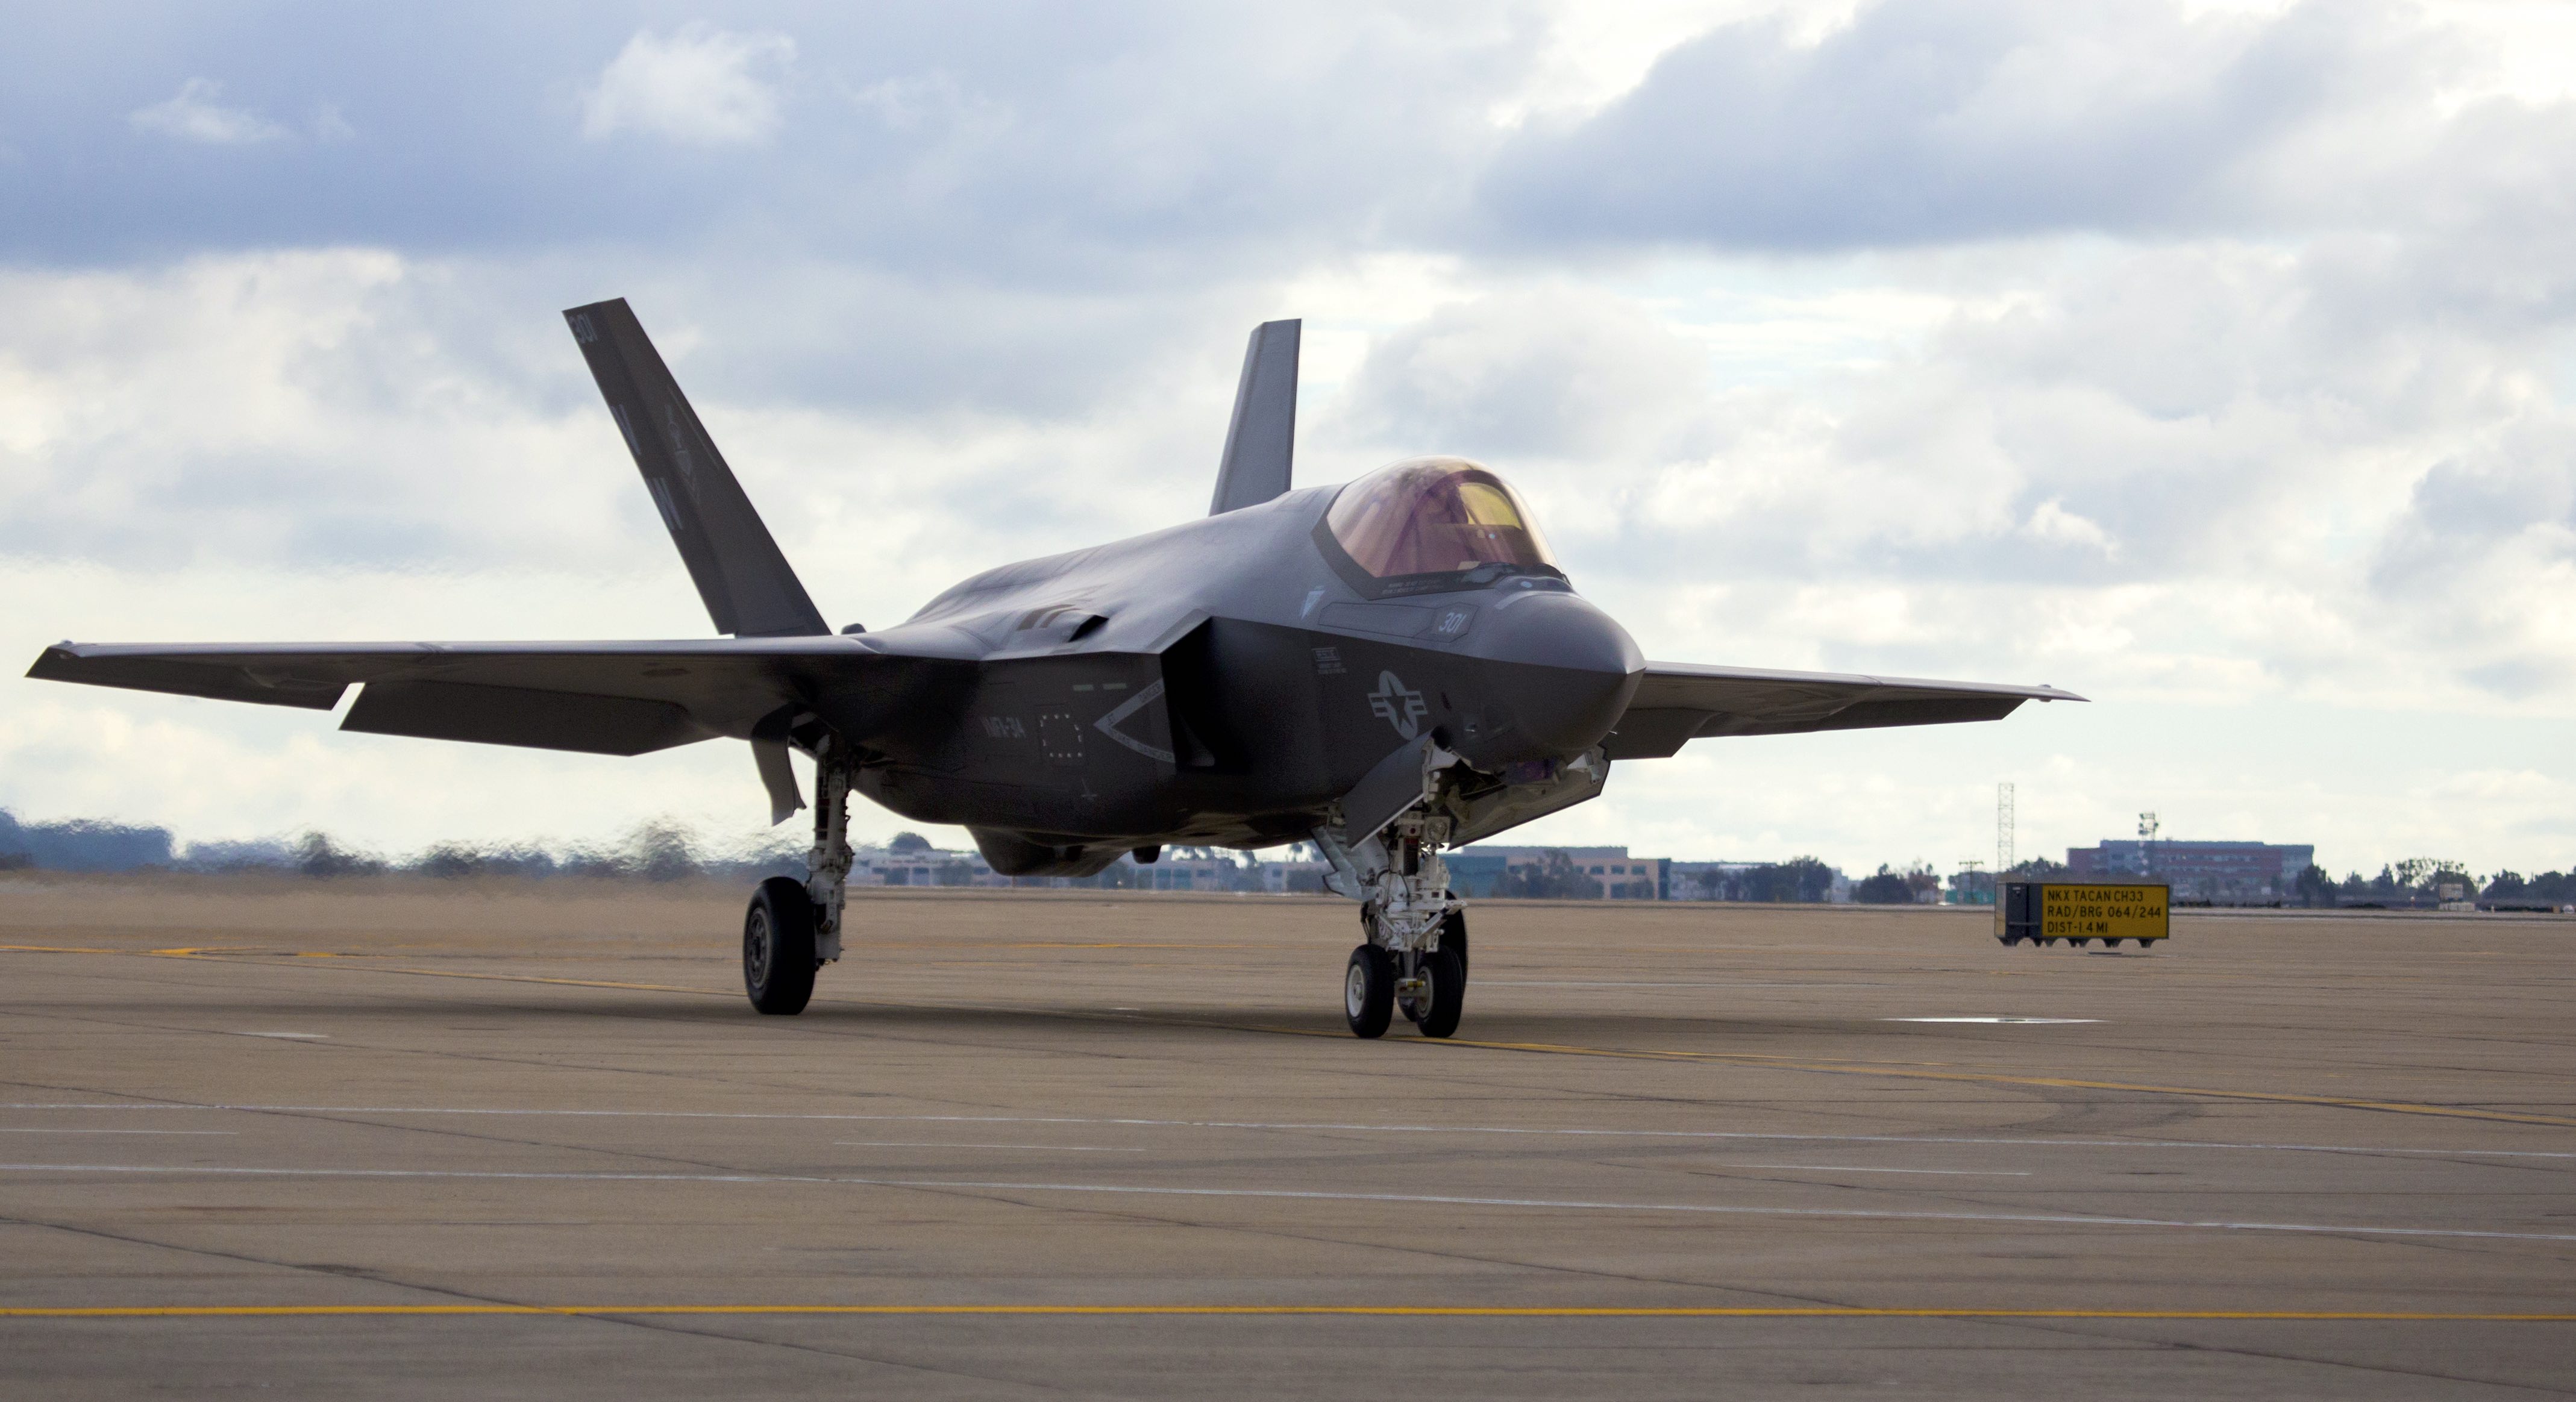 US Marine Corps USMC F-35B is the variant of the Joint Strike Fighter A1 